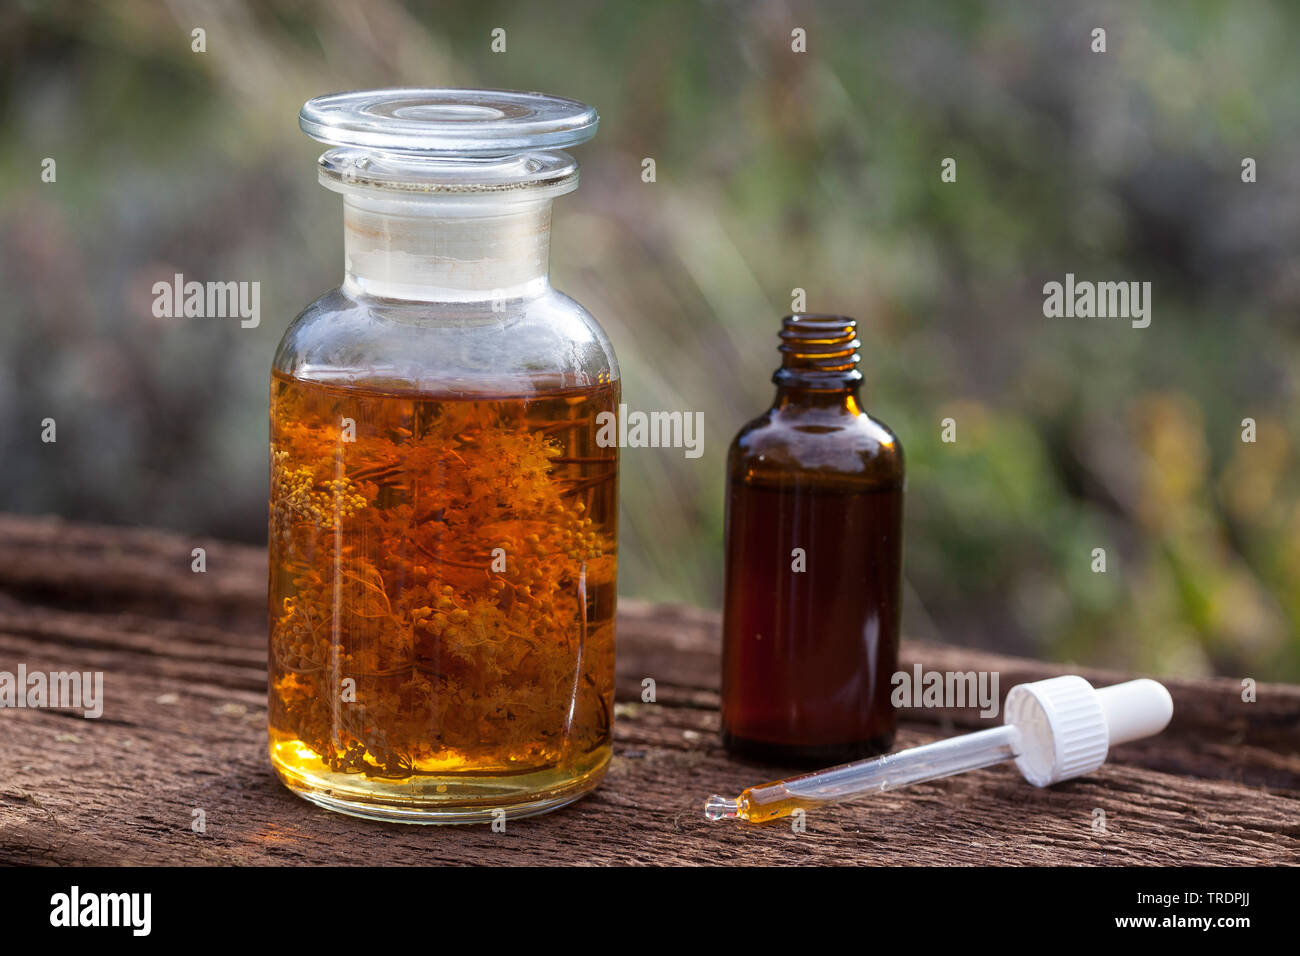 meadowsweet, queen-of-the-meadow (Filipendula ulmaria), self made tincture in alcohol, Germany Stock Photo